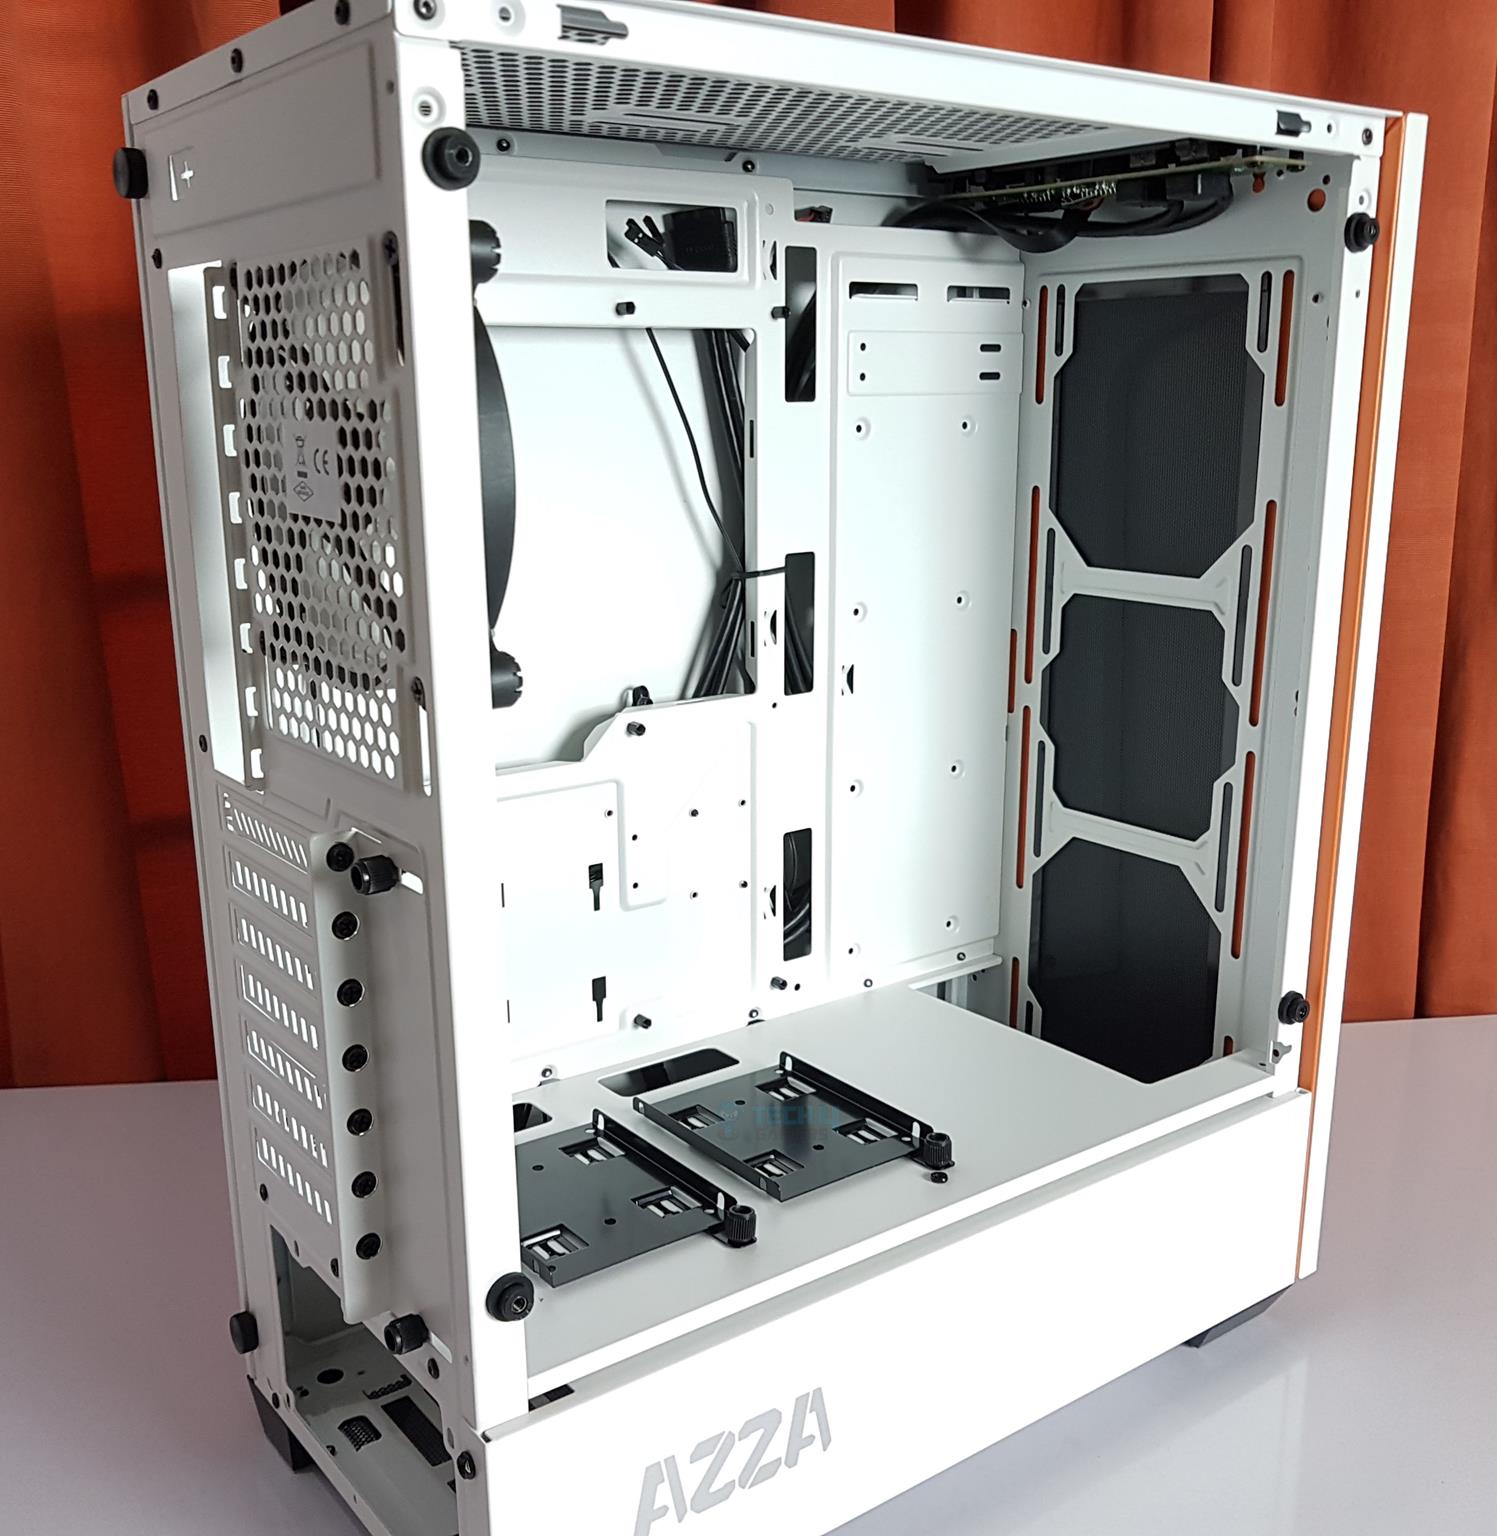 azza Full case review 